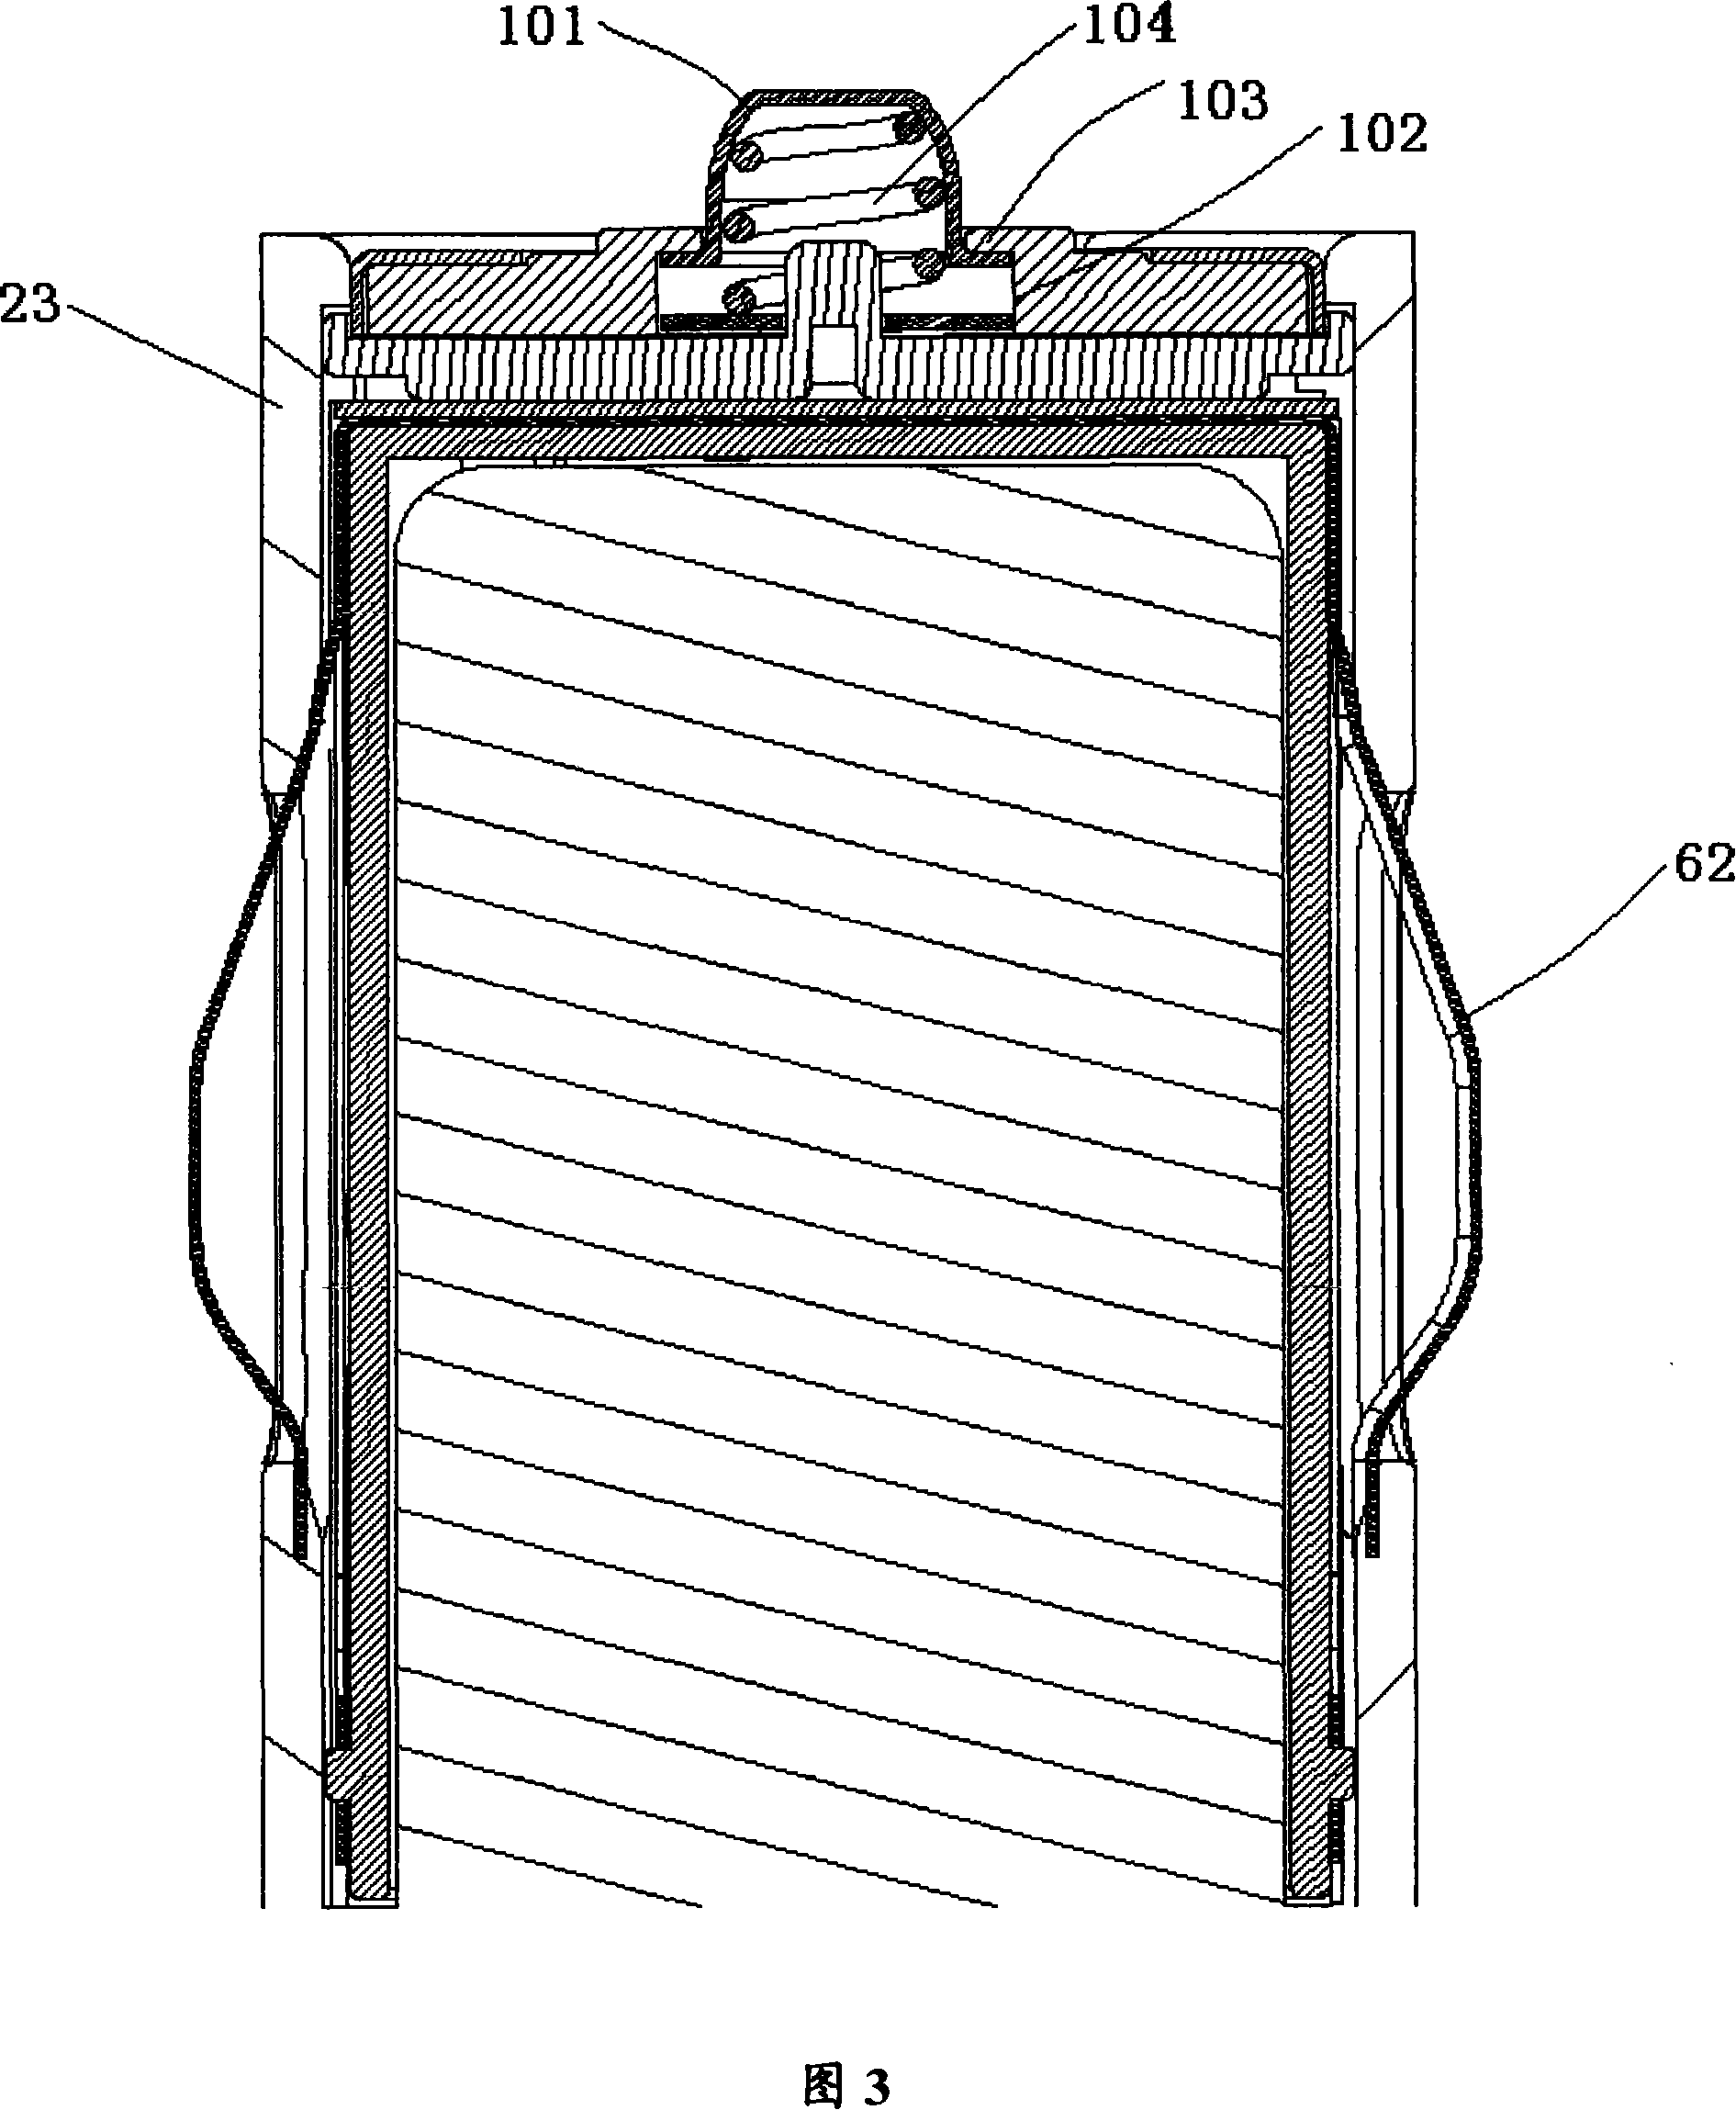 Chargeable battery without the necessary of identifying polarity